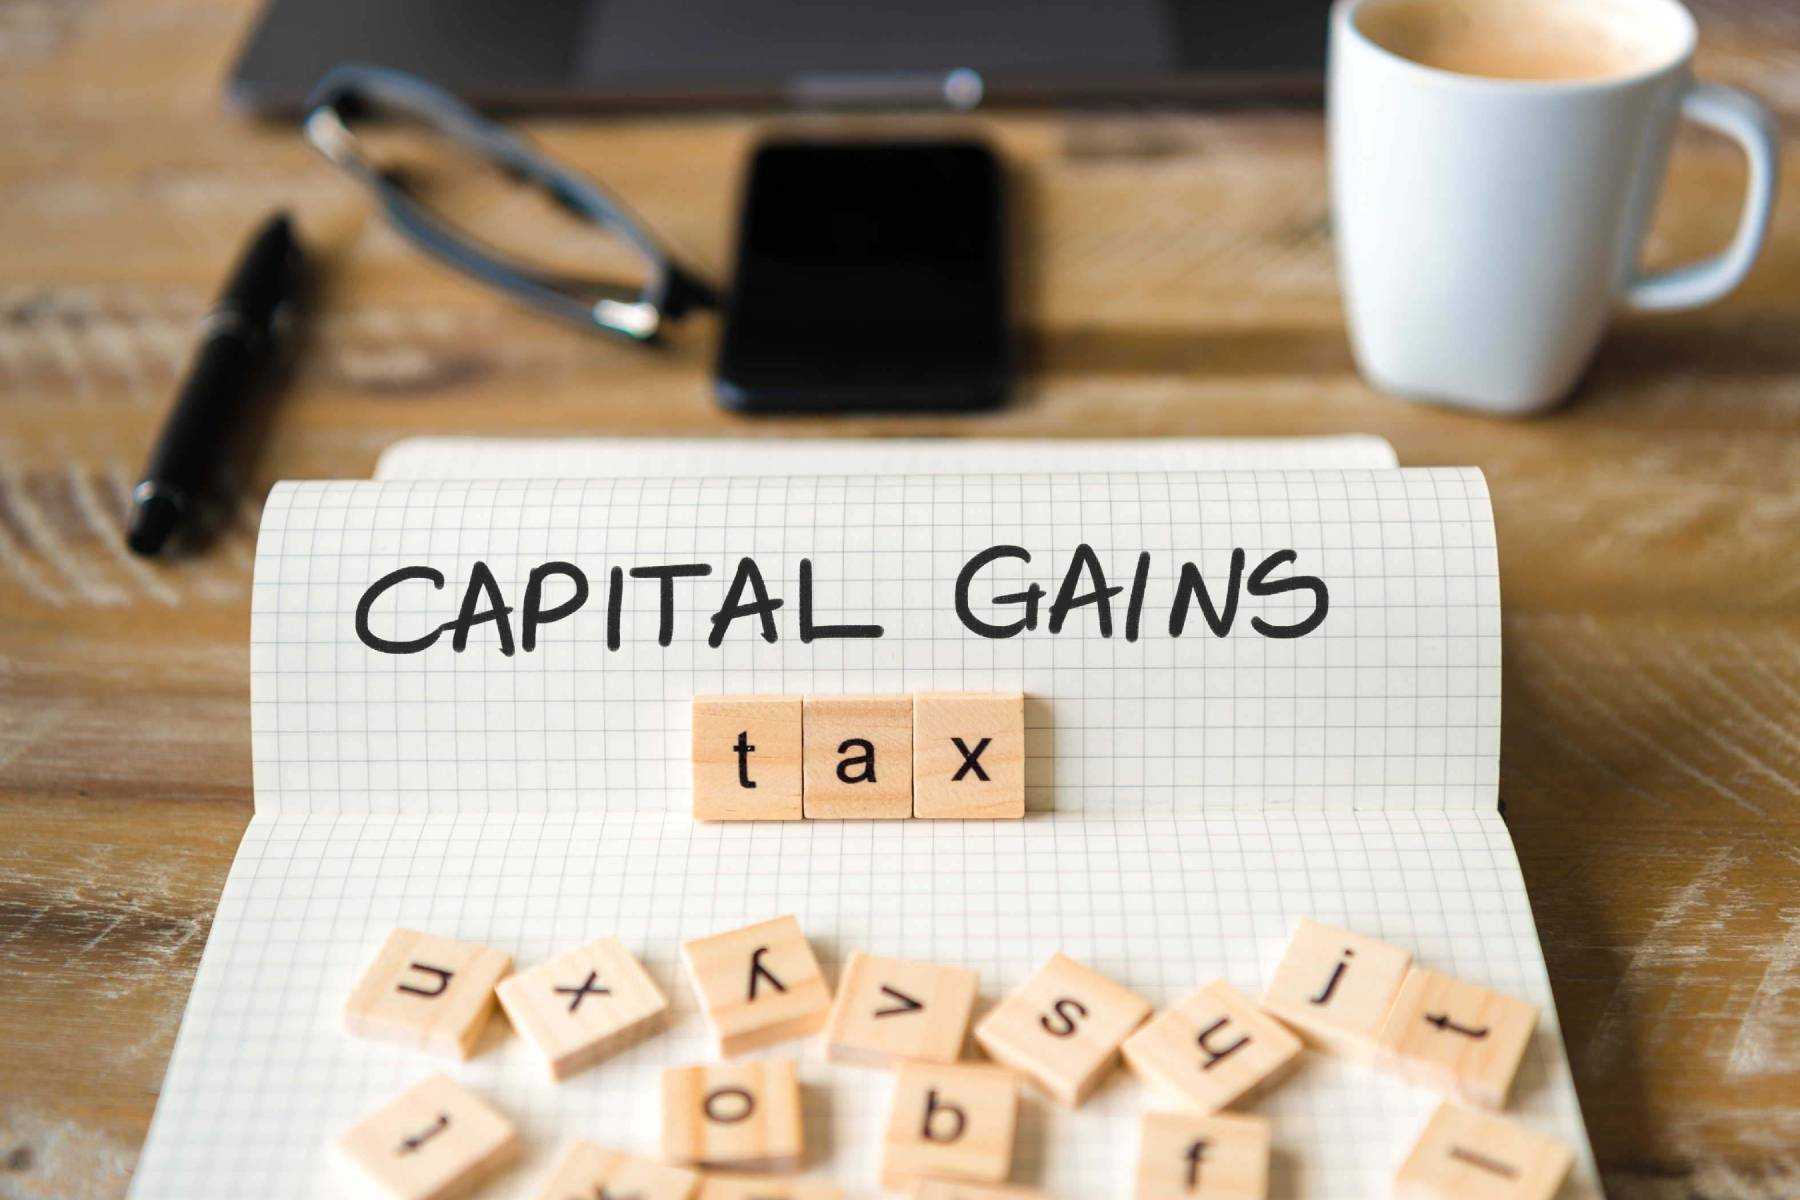 How could Capital Gains Tax changes affect house sellers?